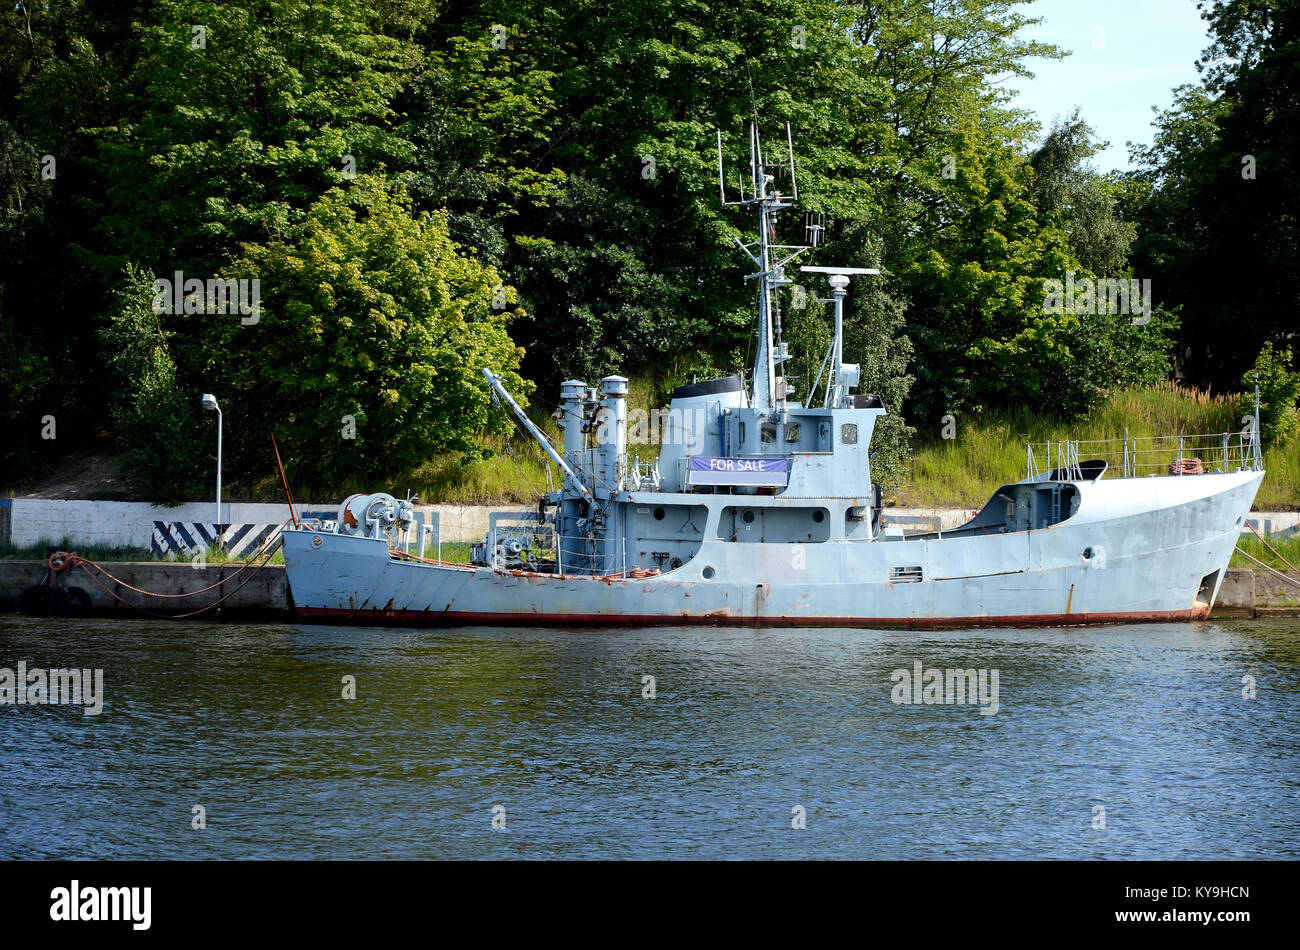 An old ship put up for sale Stock Photo